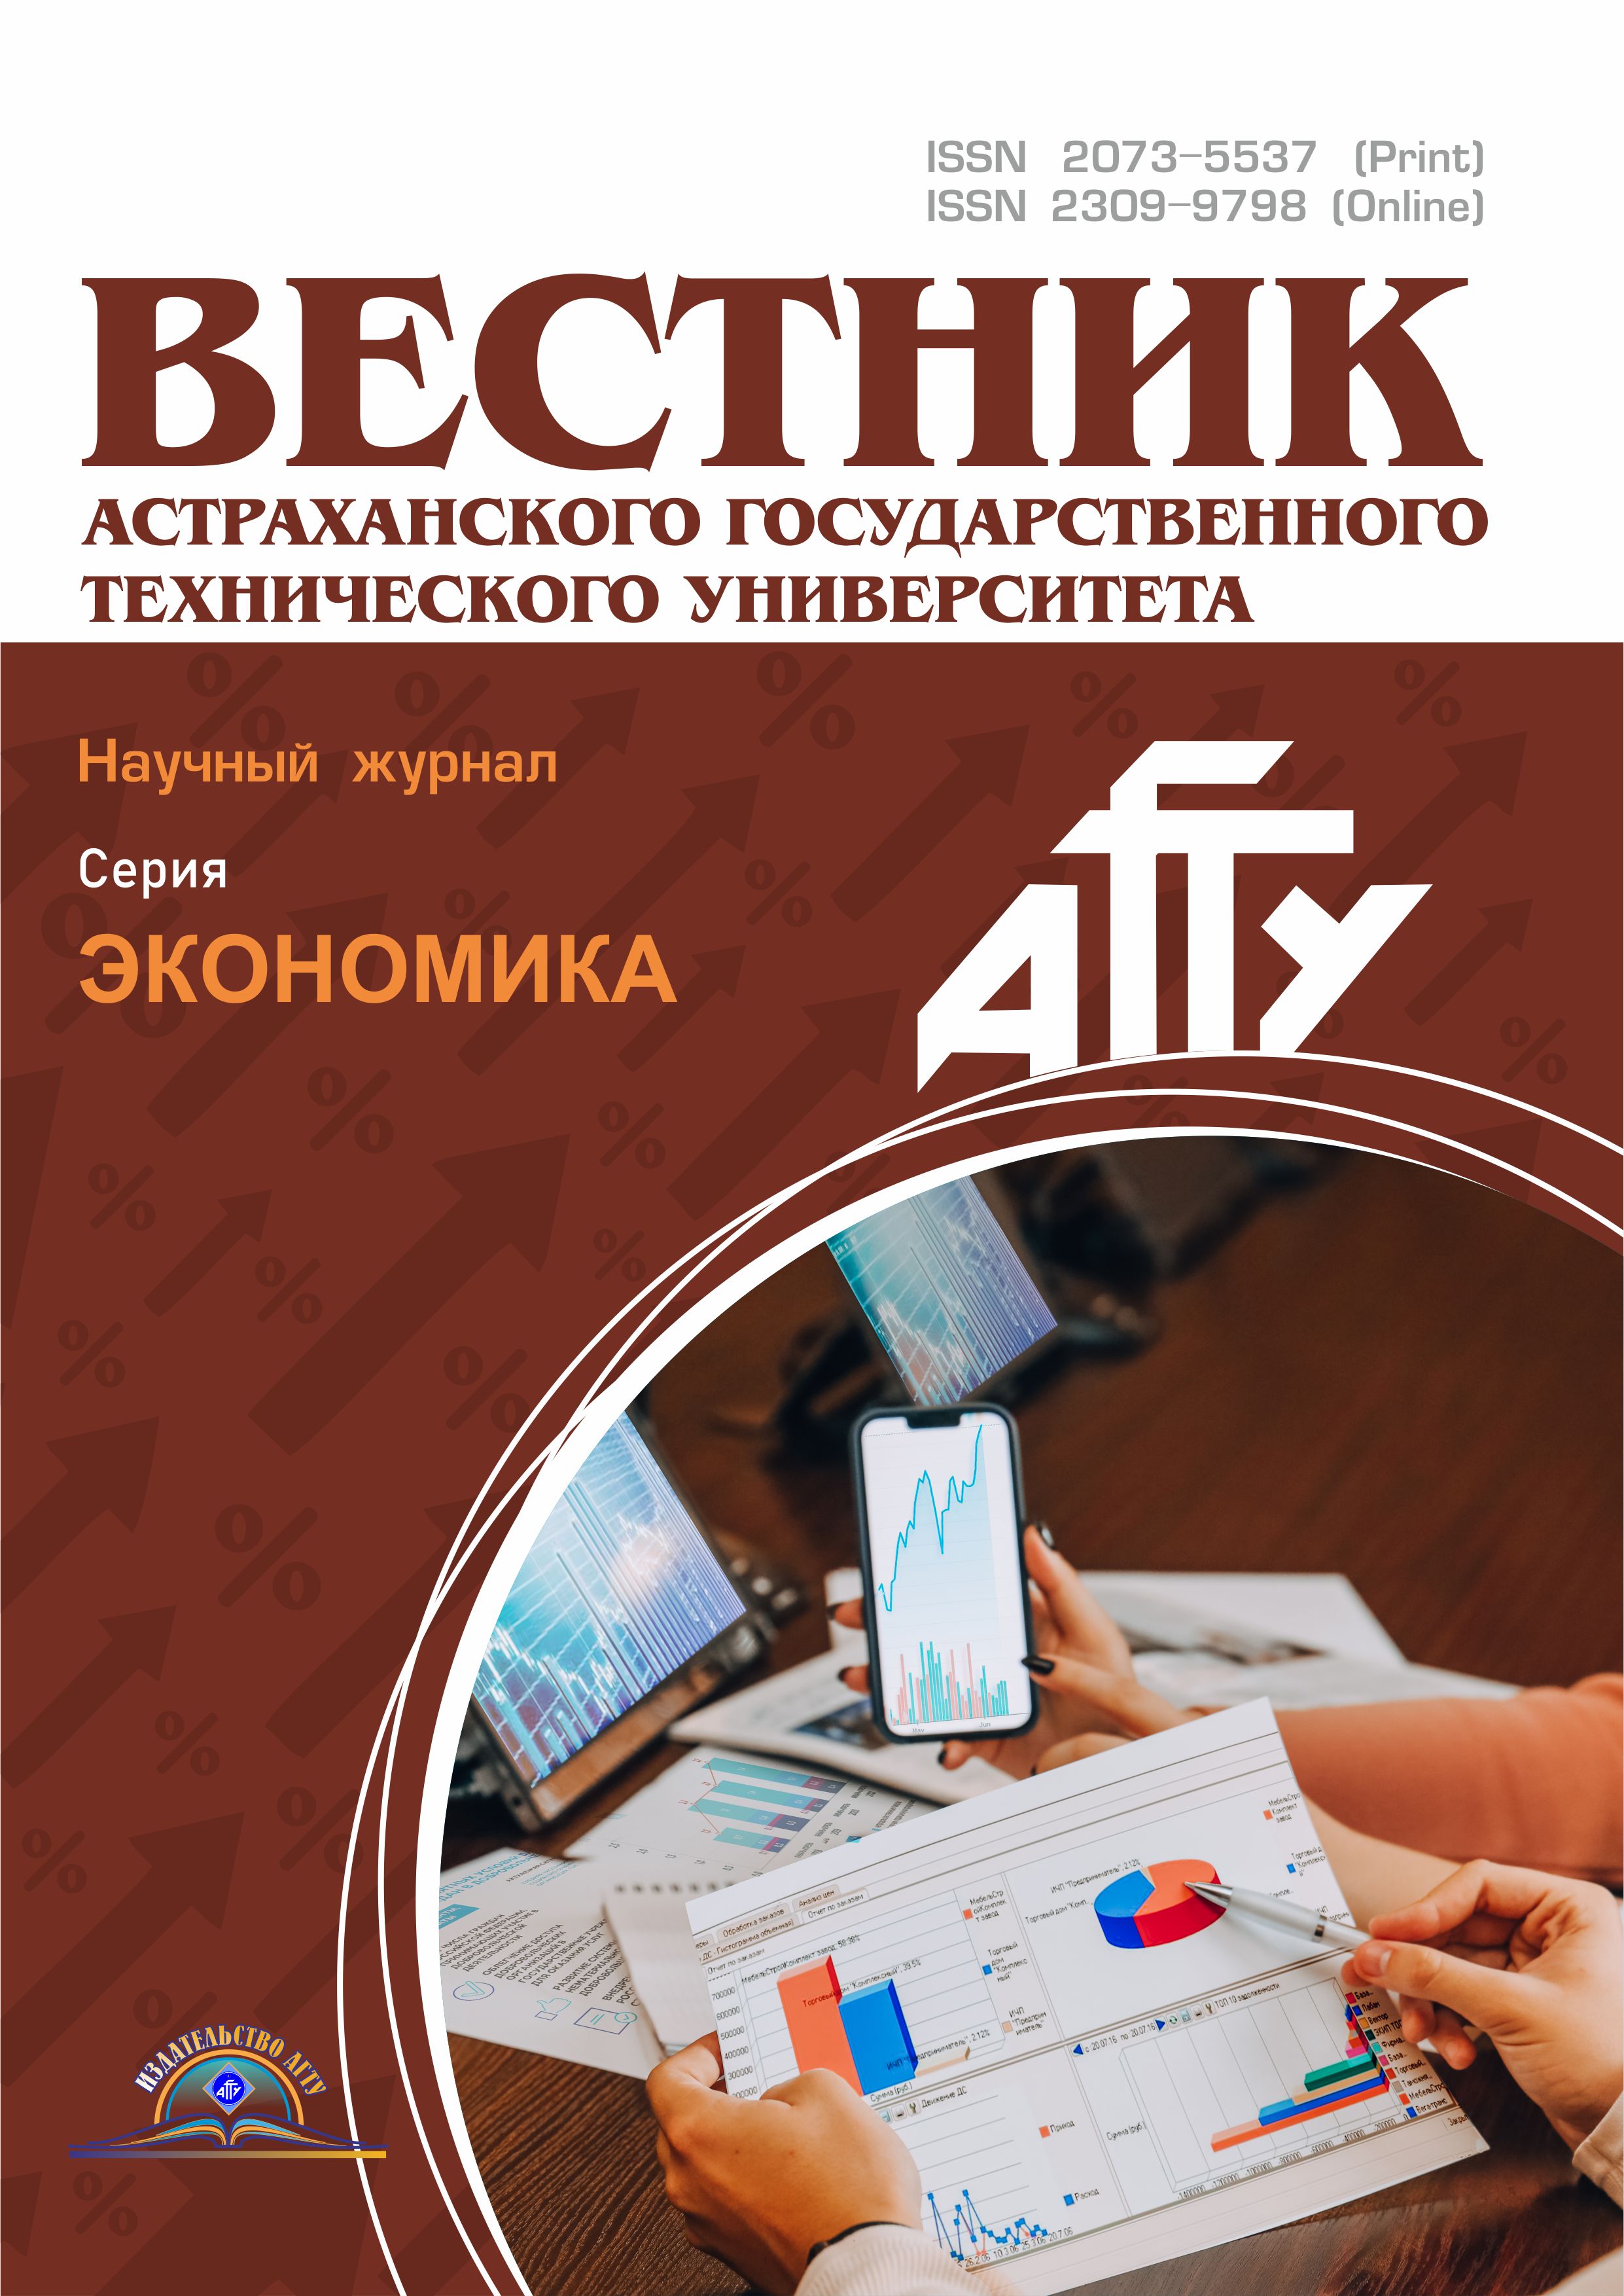                         STUDY OF THE LINE OF THE DEVELOPMENT OF INDUSTRIES AND INDUSTRIAL SUBJECTS OF THE ASTRAKHAN REGION
            